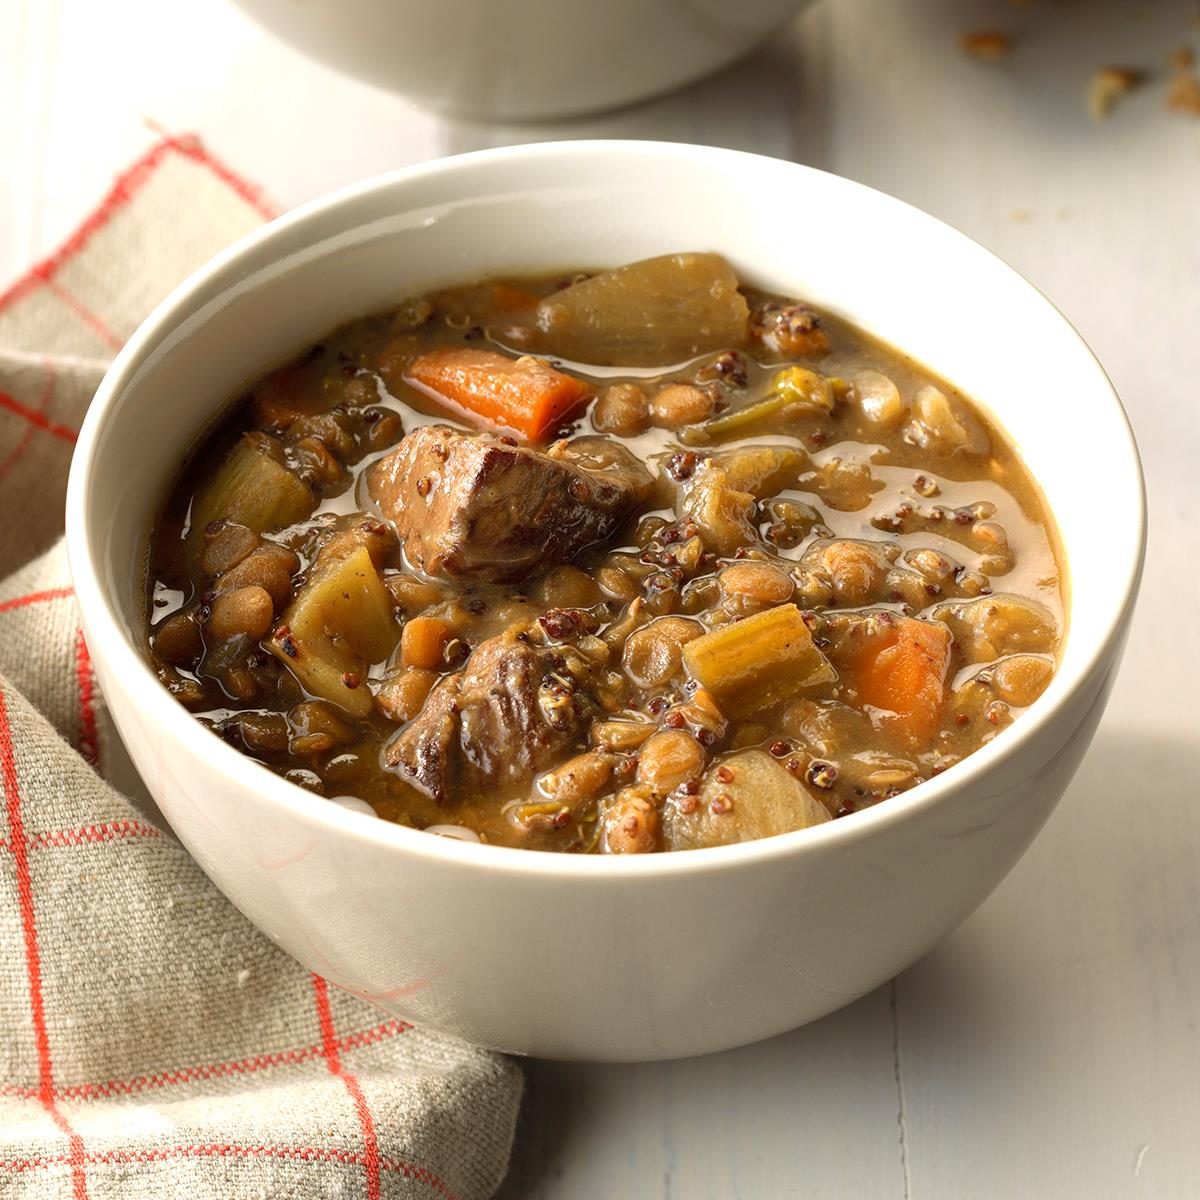 <p>My version of beef stew is comfort food with a healthy twist. I use lentils and red quinoa rather than potatoes. If leftover stew seems too thick, add more beef stock when reheating. —Margaret Roscoe, Keystone Heights, Florida</p> <div class="listicle-page__buttons"> <div class="listicle-page__cta-button"><a href='https://www.tasteofhome.com/recipes/ancient-grain-beef-stew/'>Go to Recipe</a></div> </div>